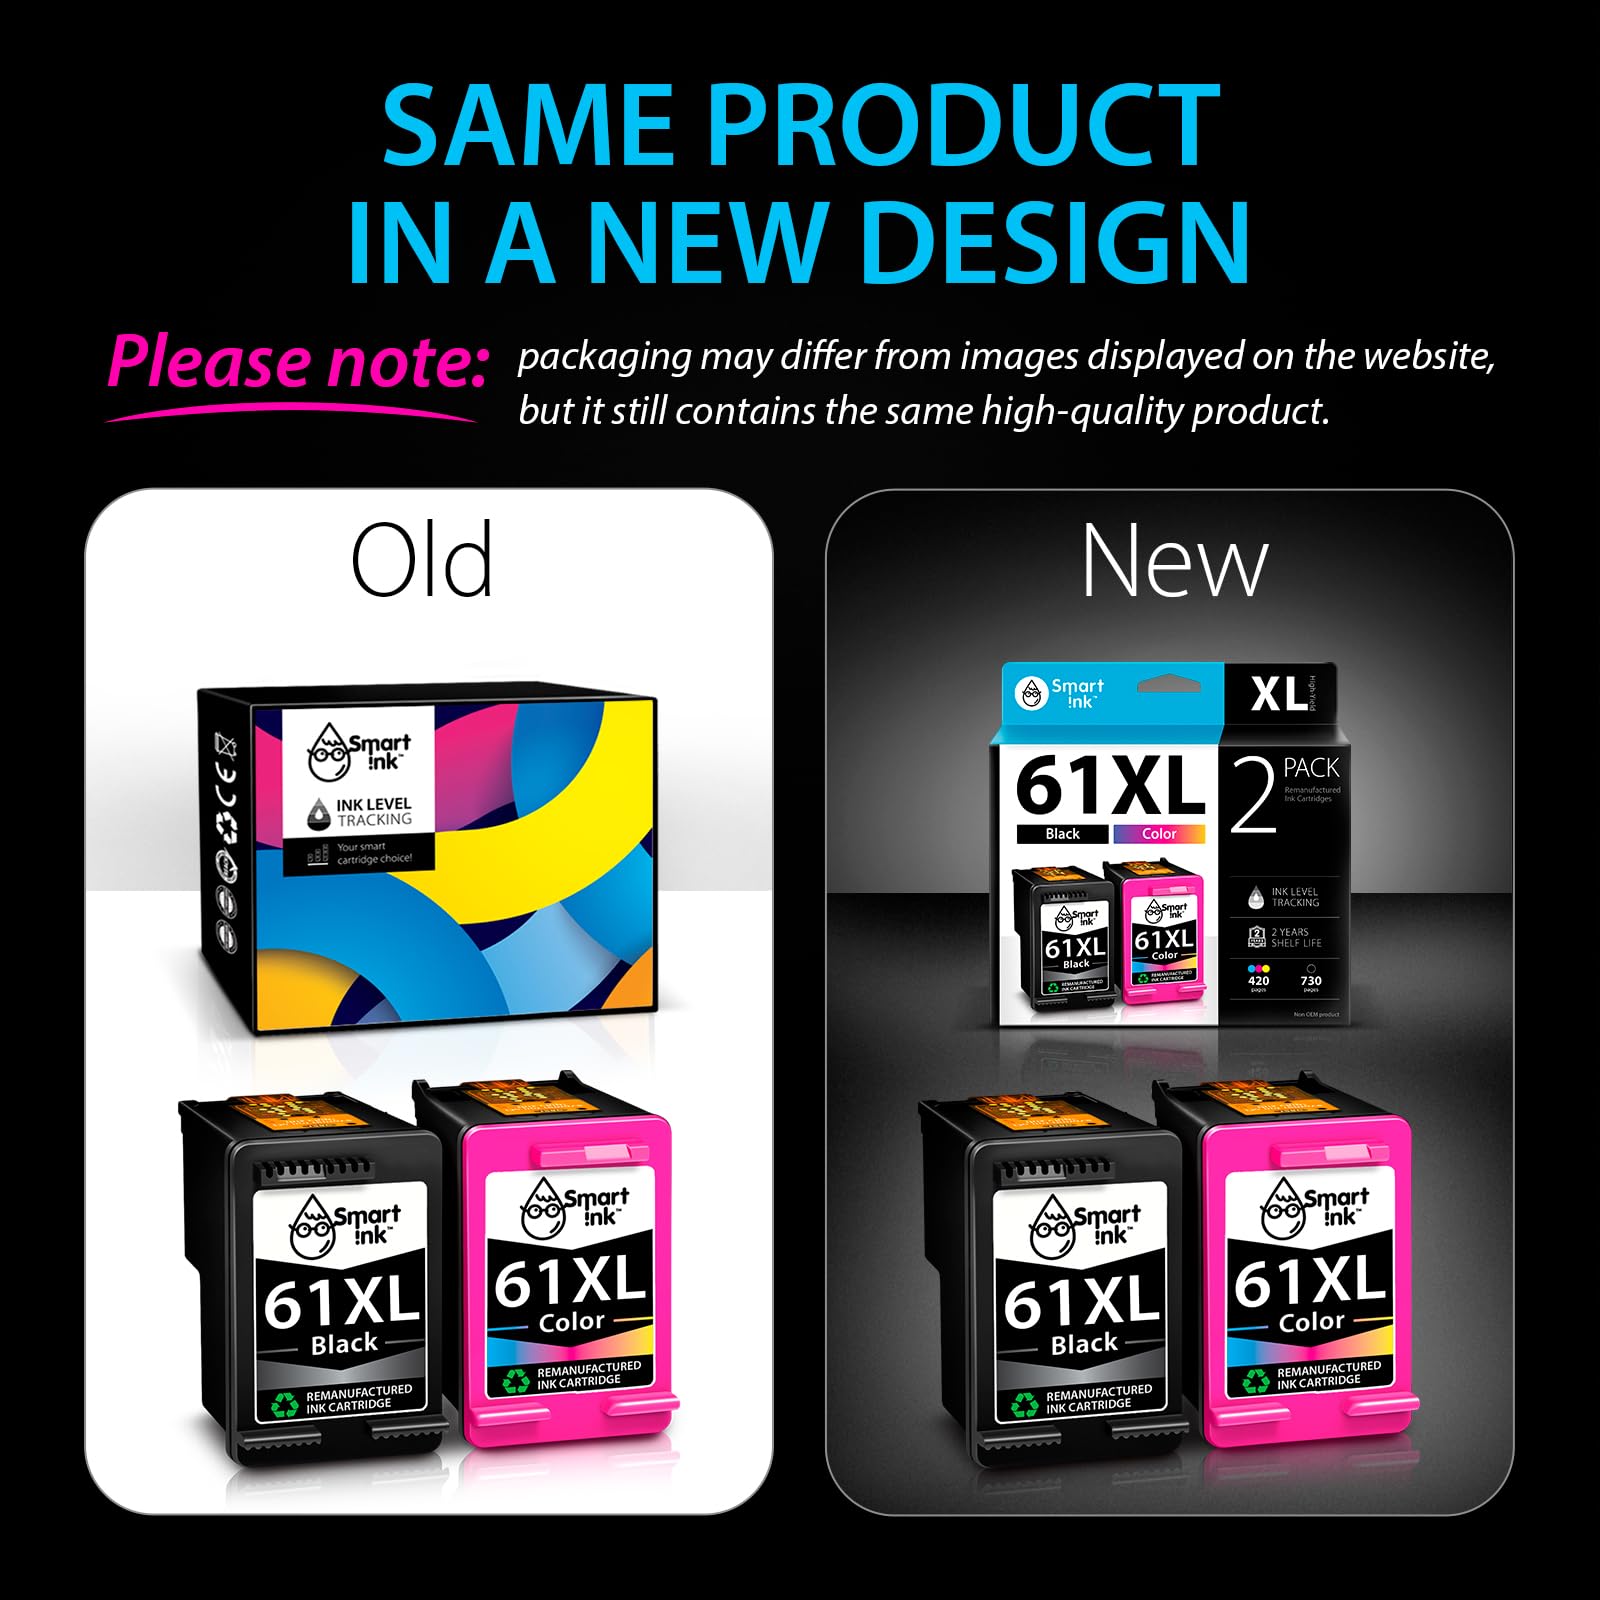 Smart Ink Remanufactured Ink Cartridge Replacement for HP 61 XL 61XL Combo Pack (Black & Tri-Color) to use with HP Envy 4500 4502 5530 OfficeJet 4630 DeskJet 3510 3050 2548 2540 1510 1010 1000